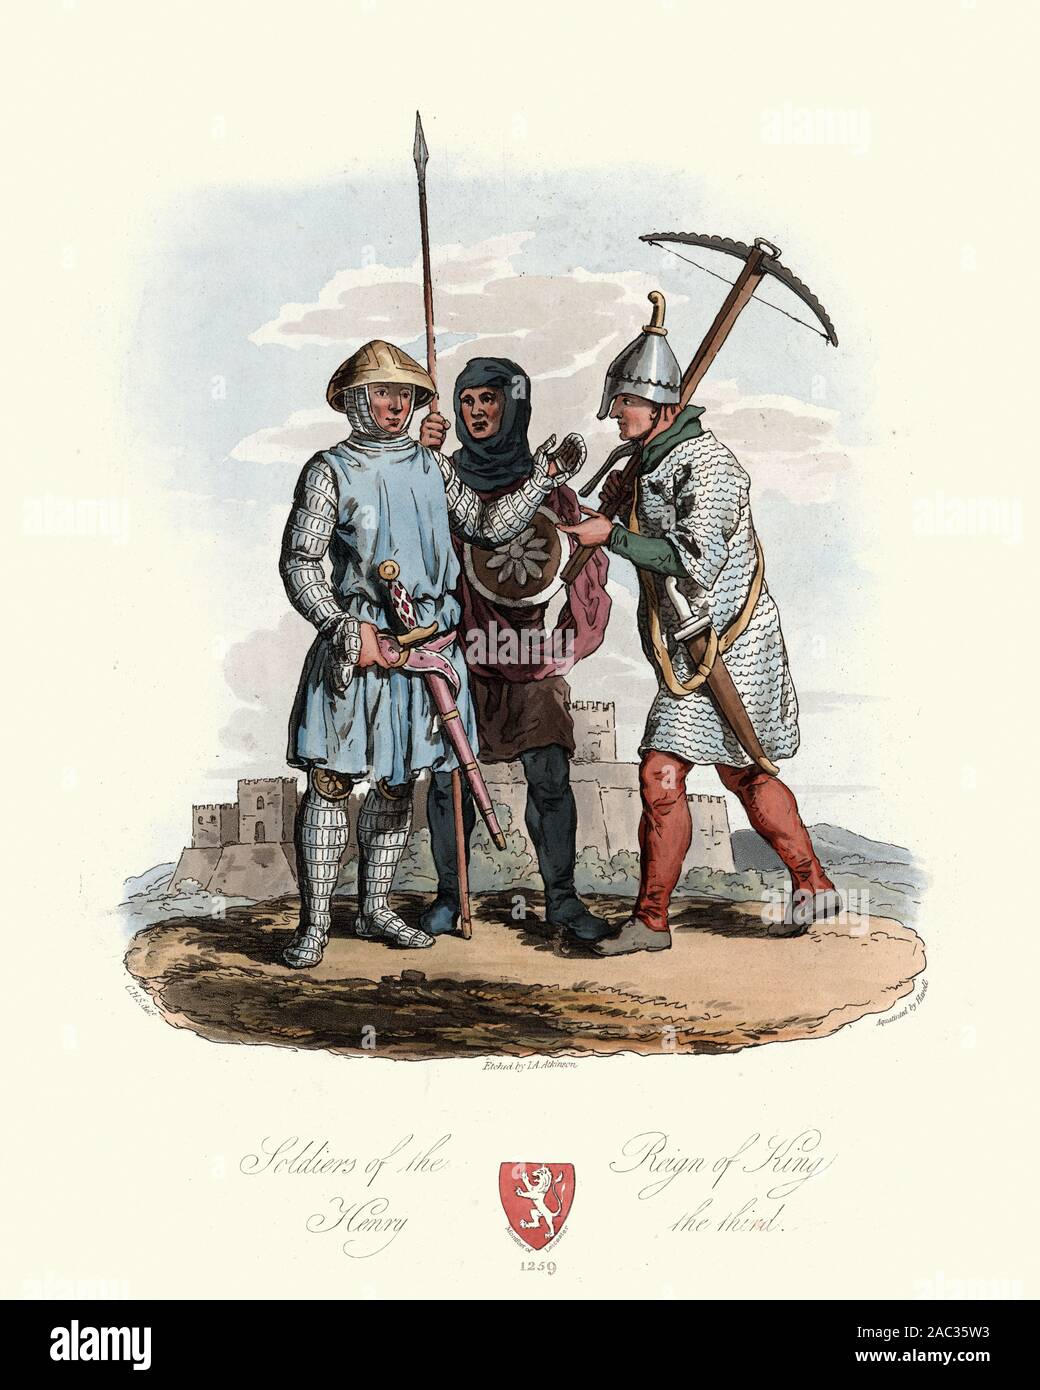 Medieval soldiers of the reign of Henry III, Swordsman, Spear and Crossbow wearing chainmail armour, 13th Century. Ancient costumes of England, 1813 Stock Photo